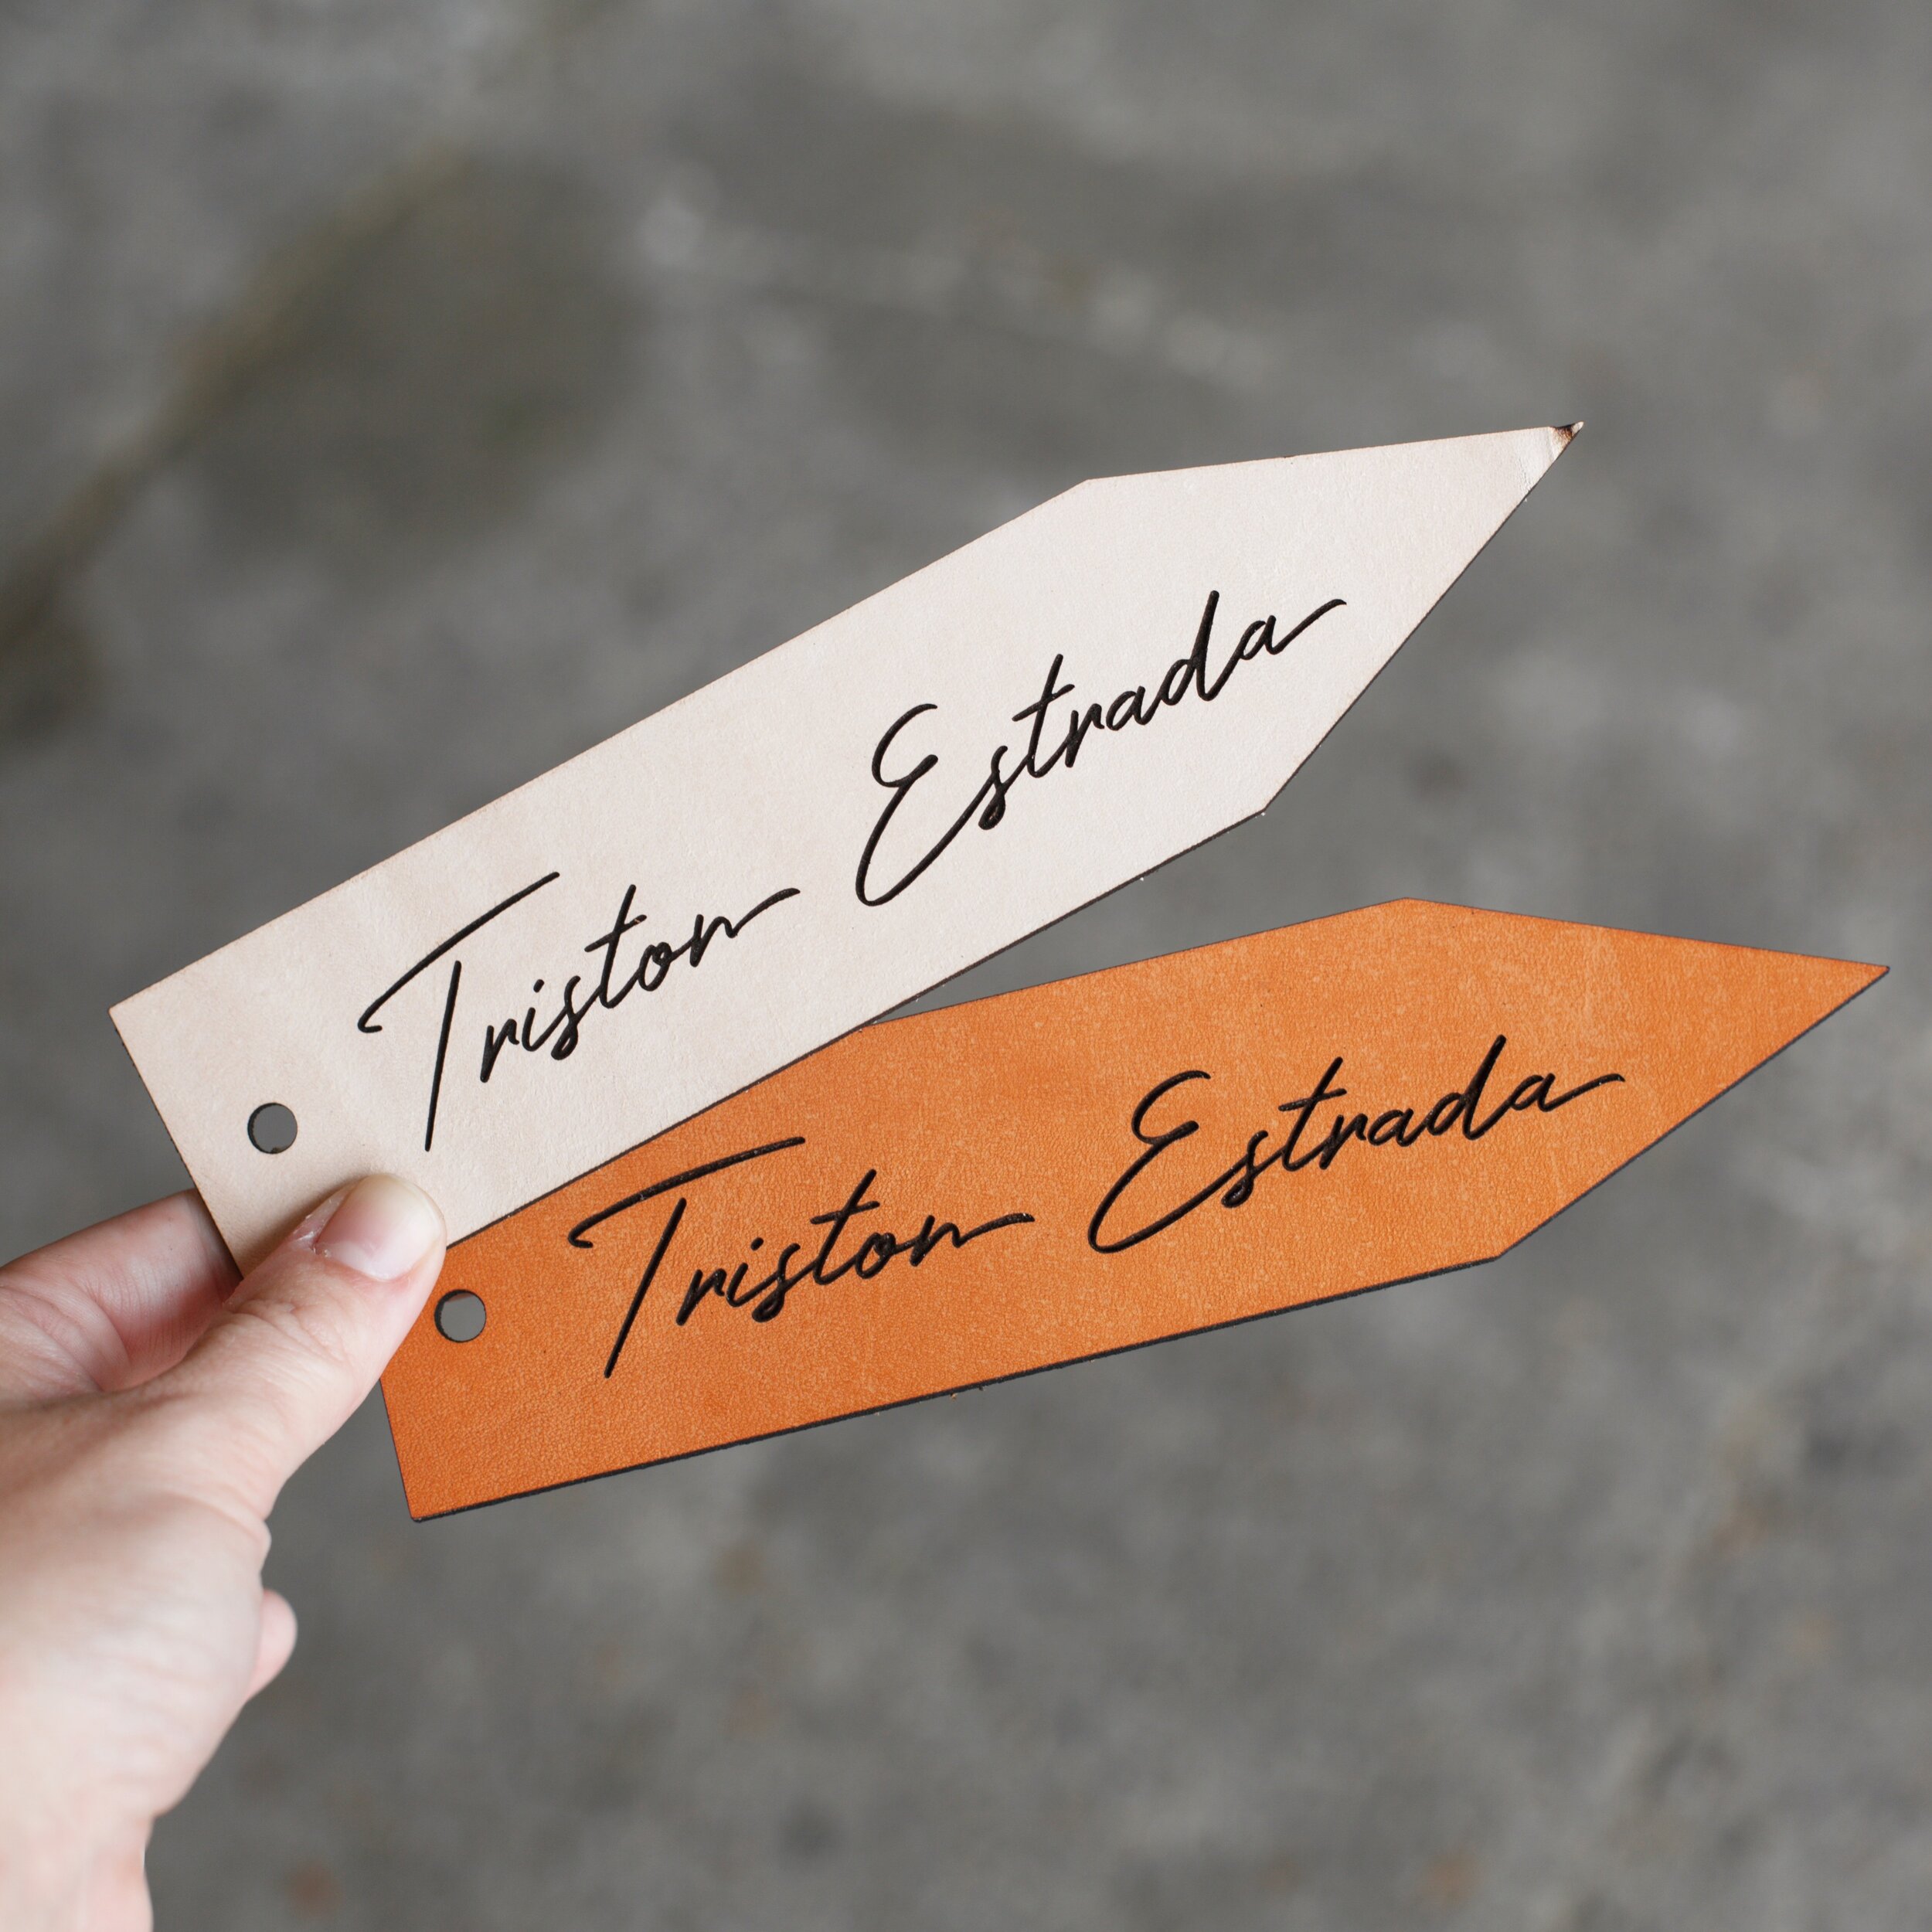 cut-etched-leather-name-tags-placecards-triston-estrada-wedding.JPG